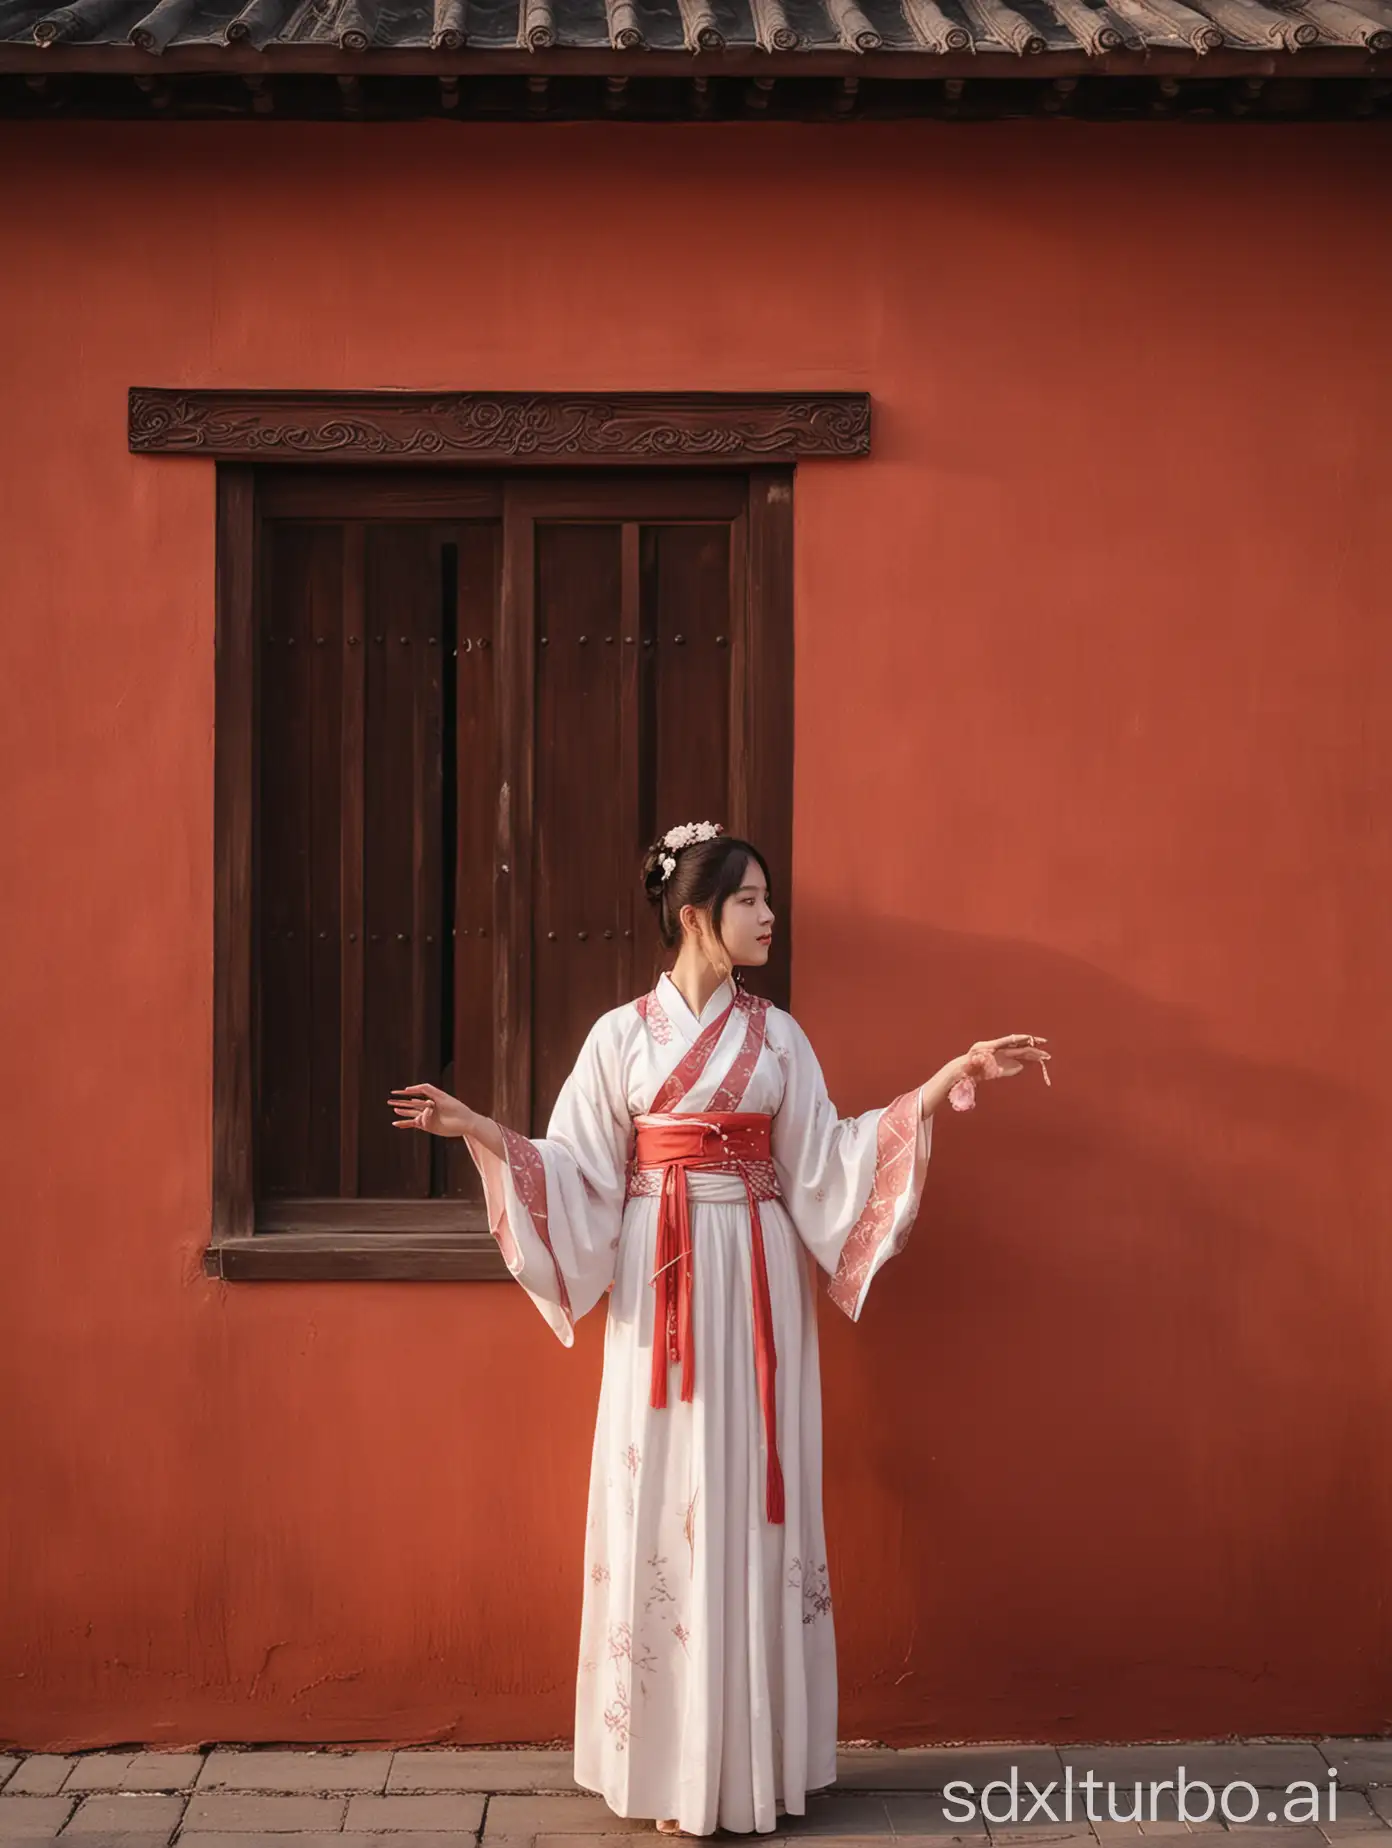 A girl, standing in front of the red wall to take a photo, wearing Hanfu, when the sun sets